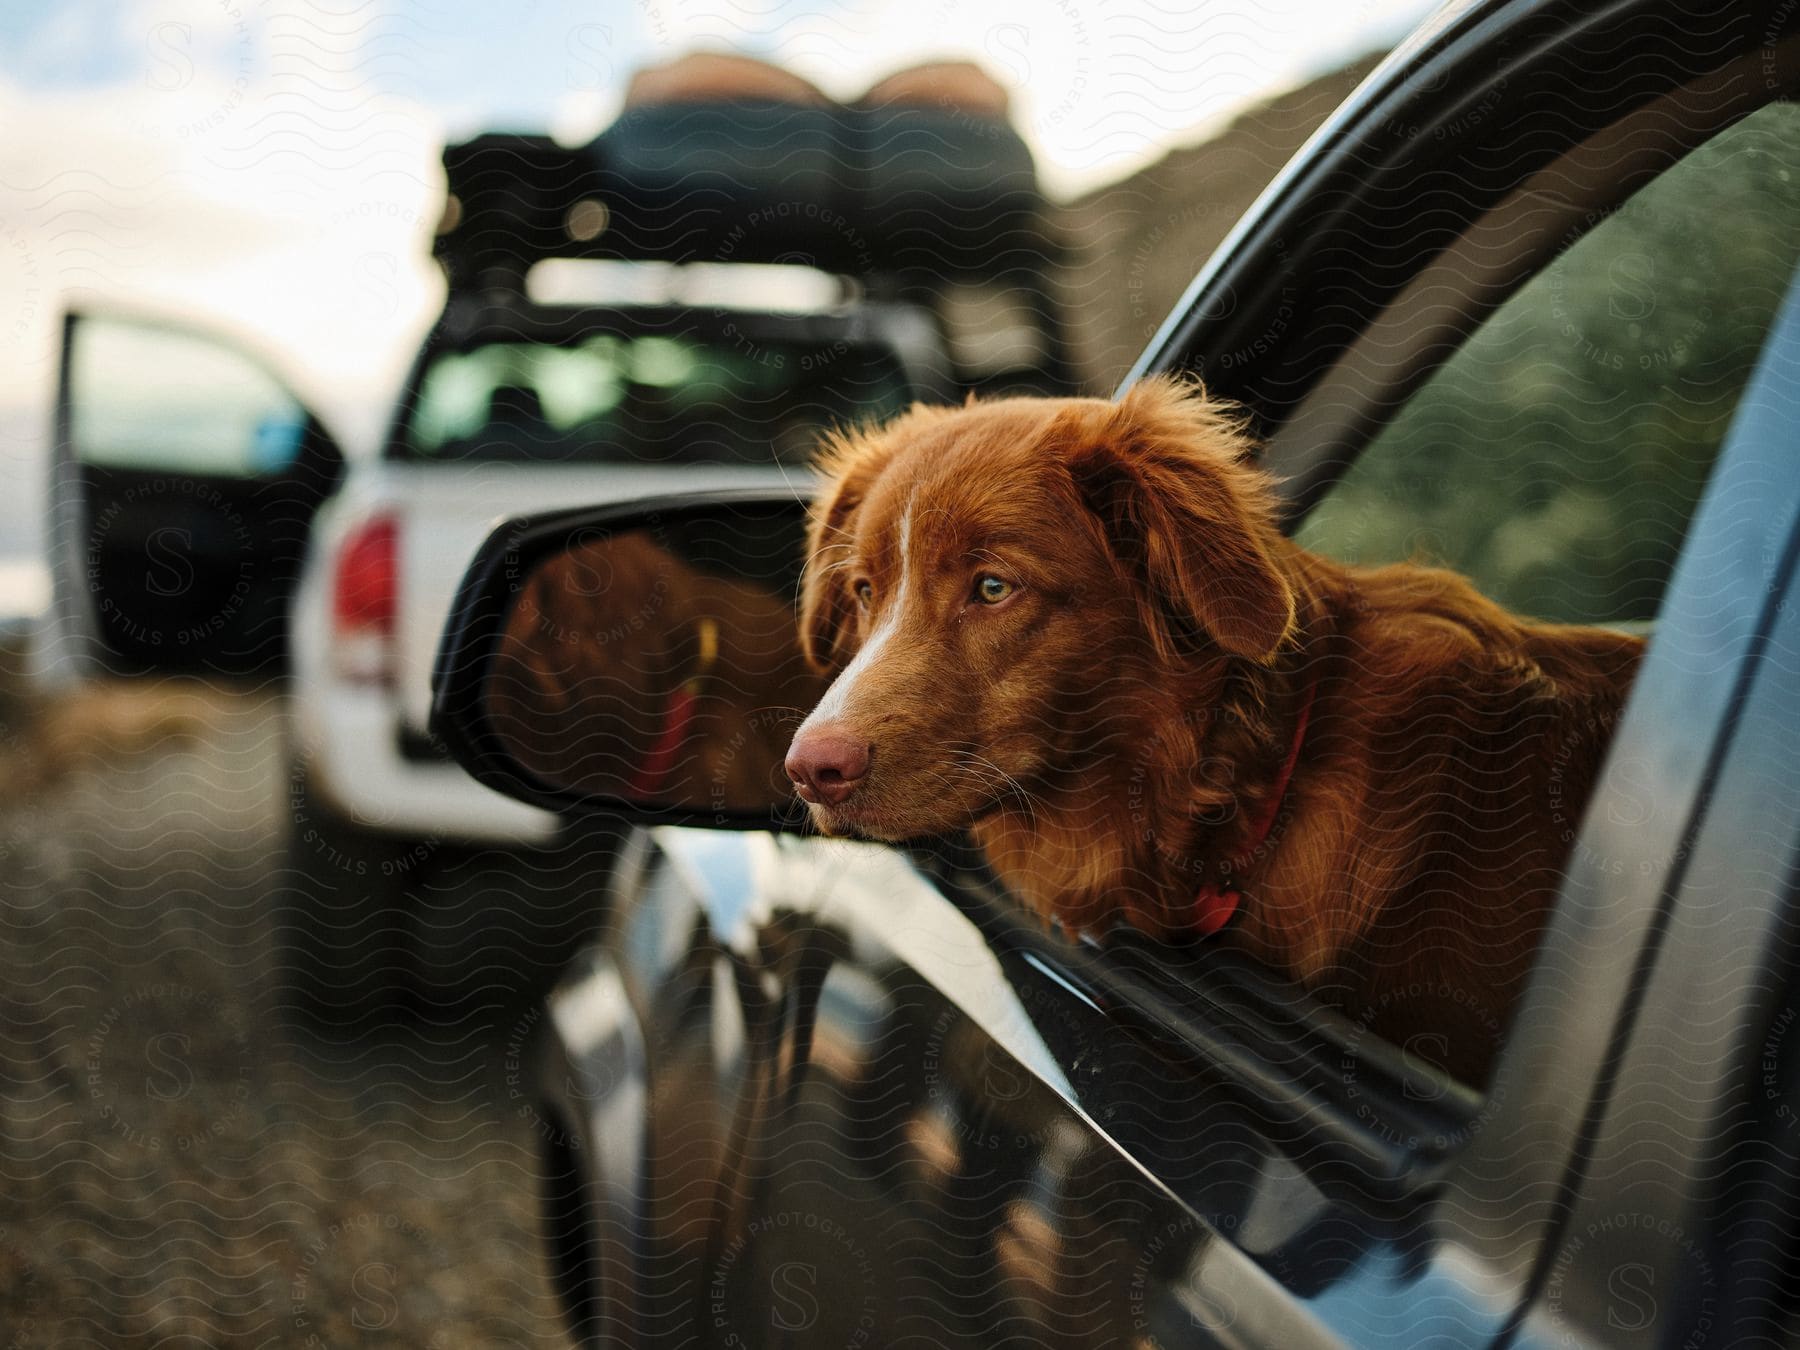 A large brown dog peaks its head out the window of a vehicle on a mostly cloudy day.